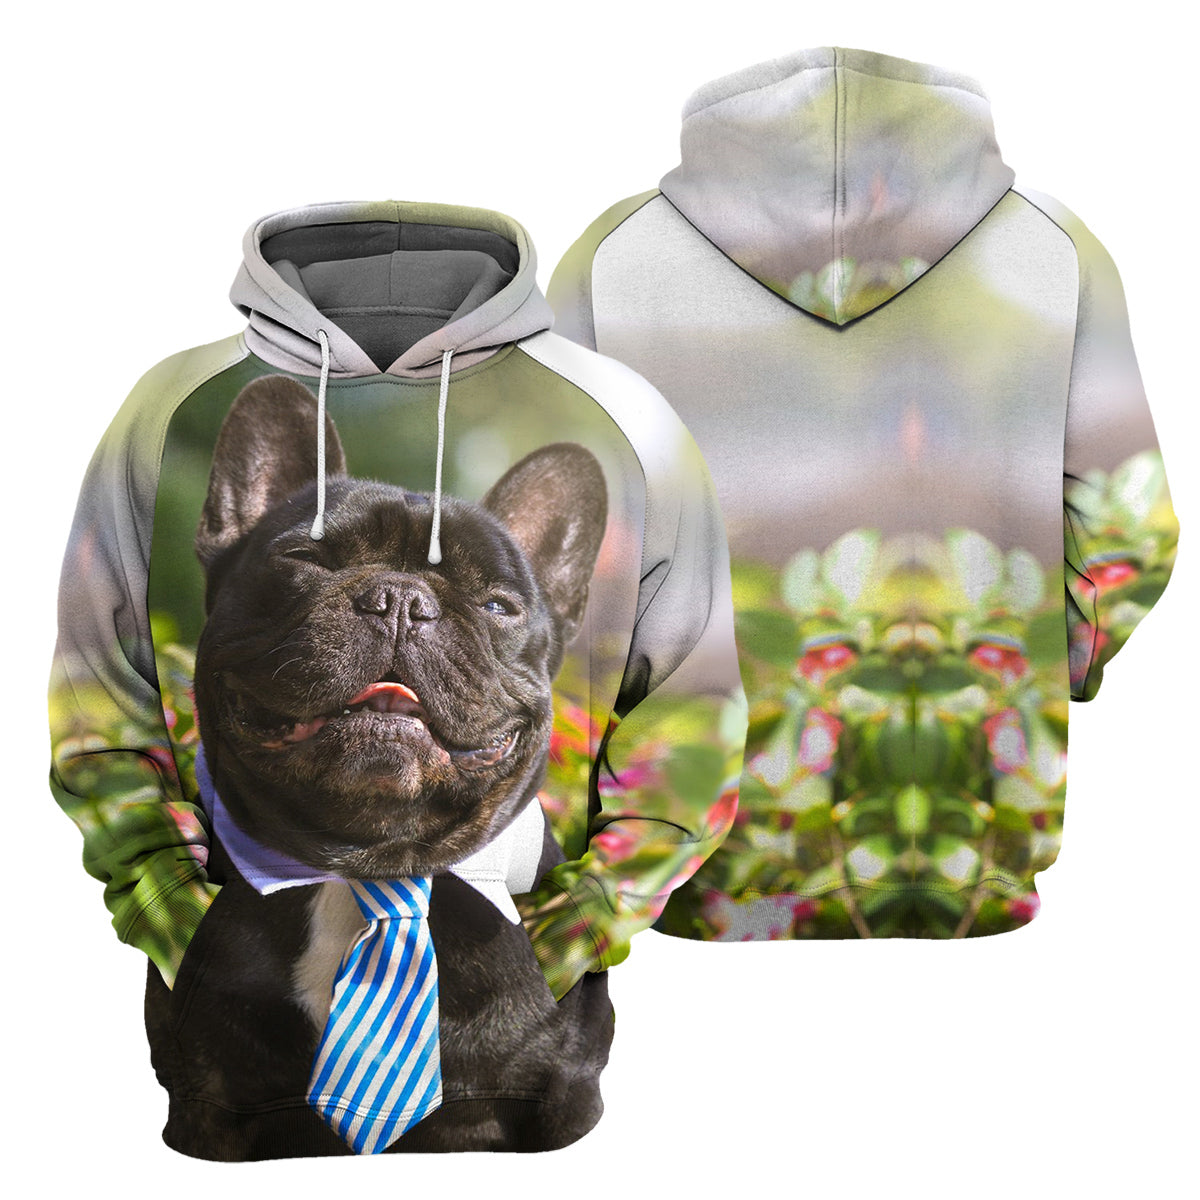 Gearhumans French Bulldog - 3D All Over Printed Shirt